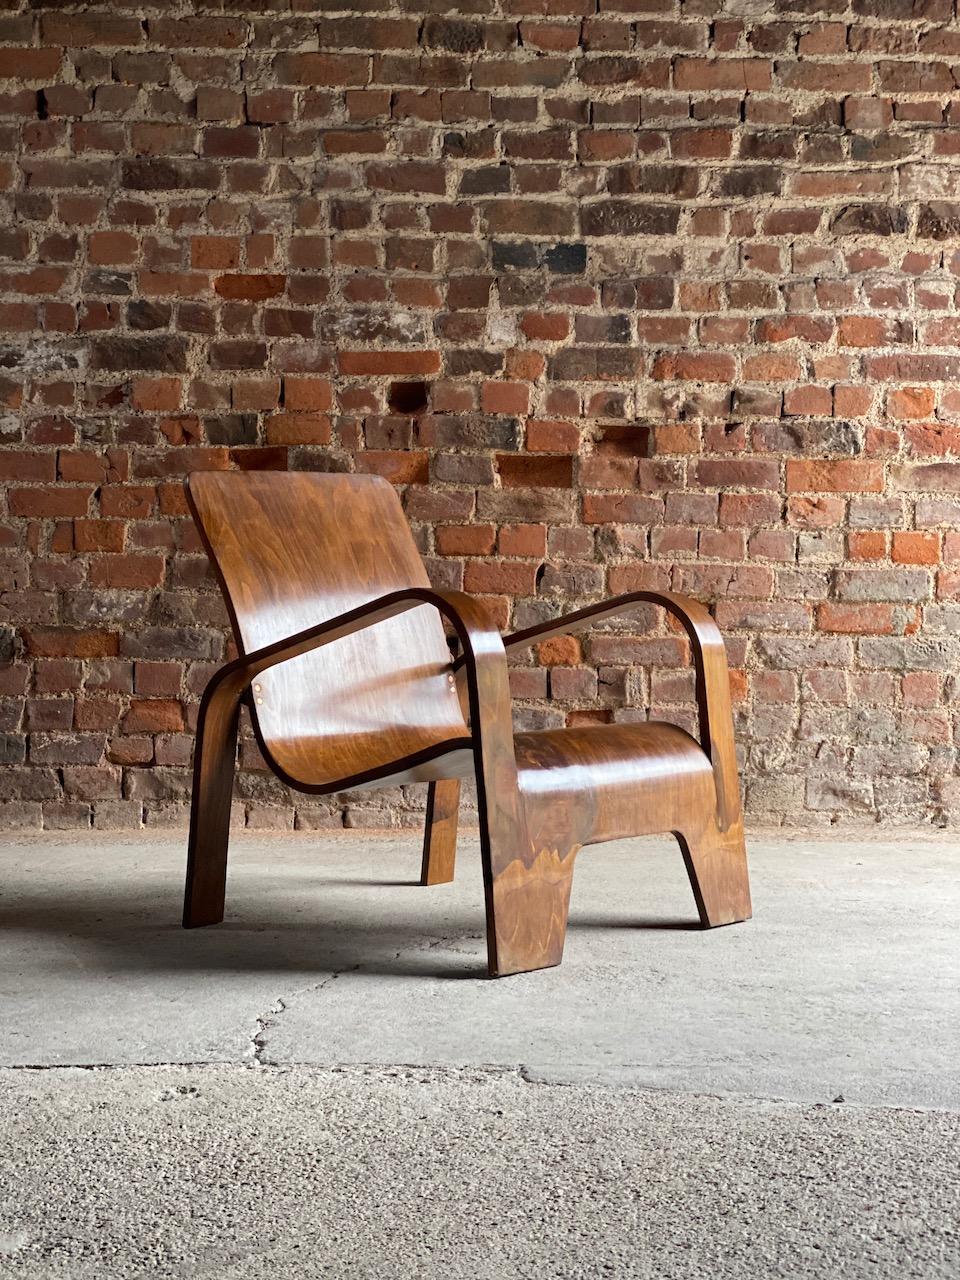 Han Pieck Lawo armchair, circa 1940
Han Pieck Lawo armchair circa 1940, the chair having recently undergone a full restoration.
The Lawo chair, so named because it was made of LA-minated WO-od, was brilliantly constructed from a single sheet of